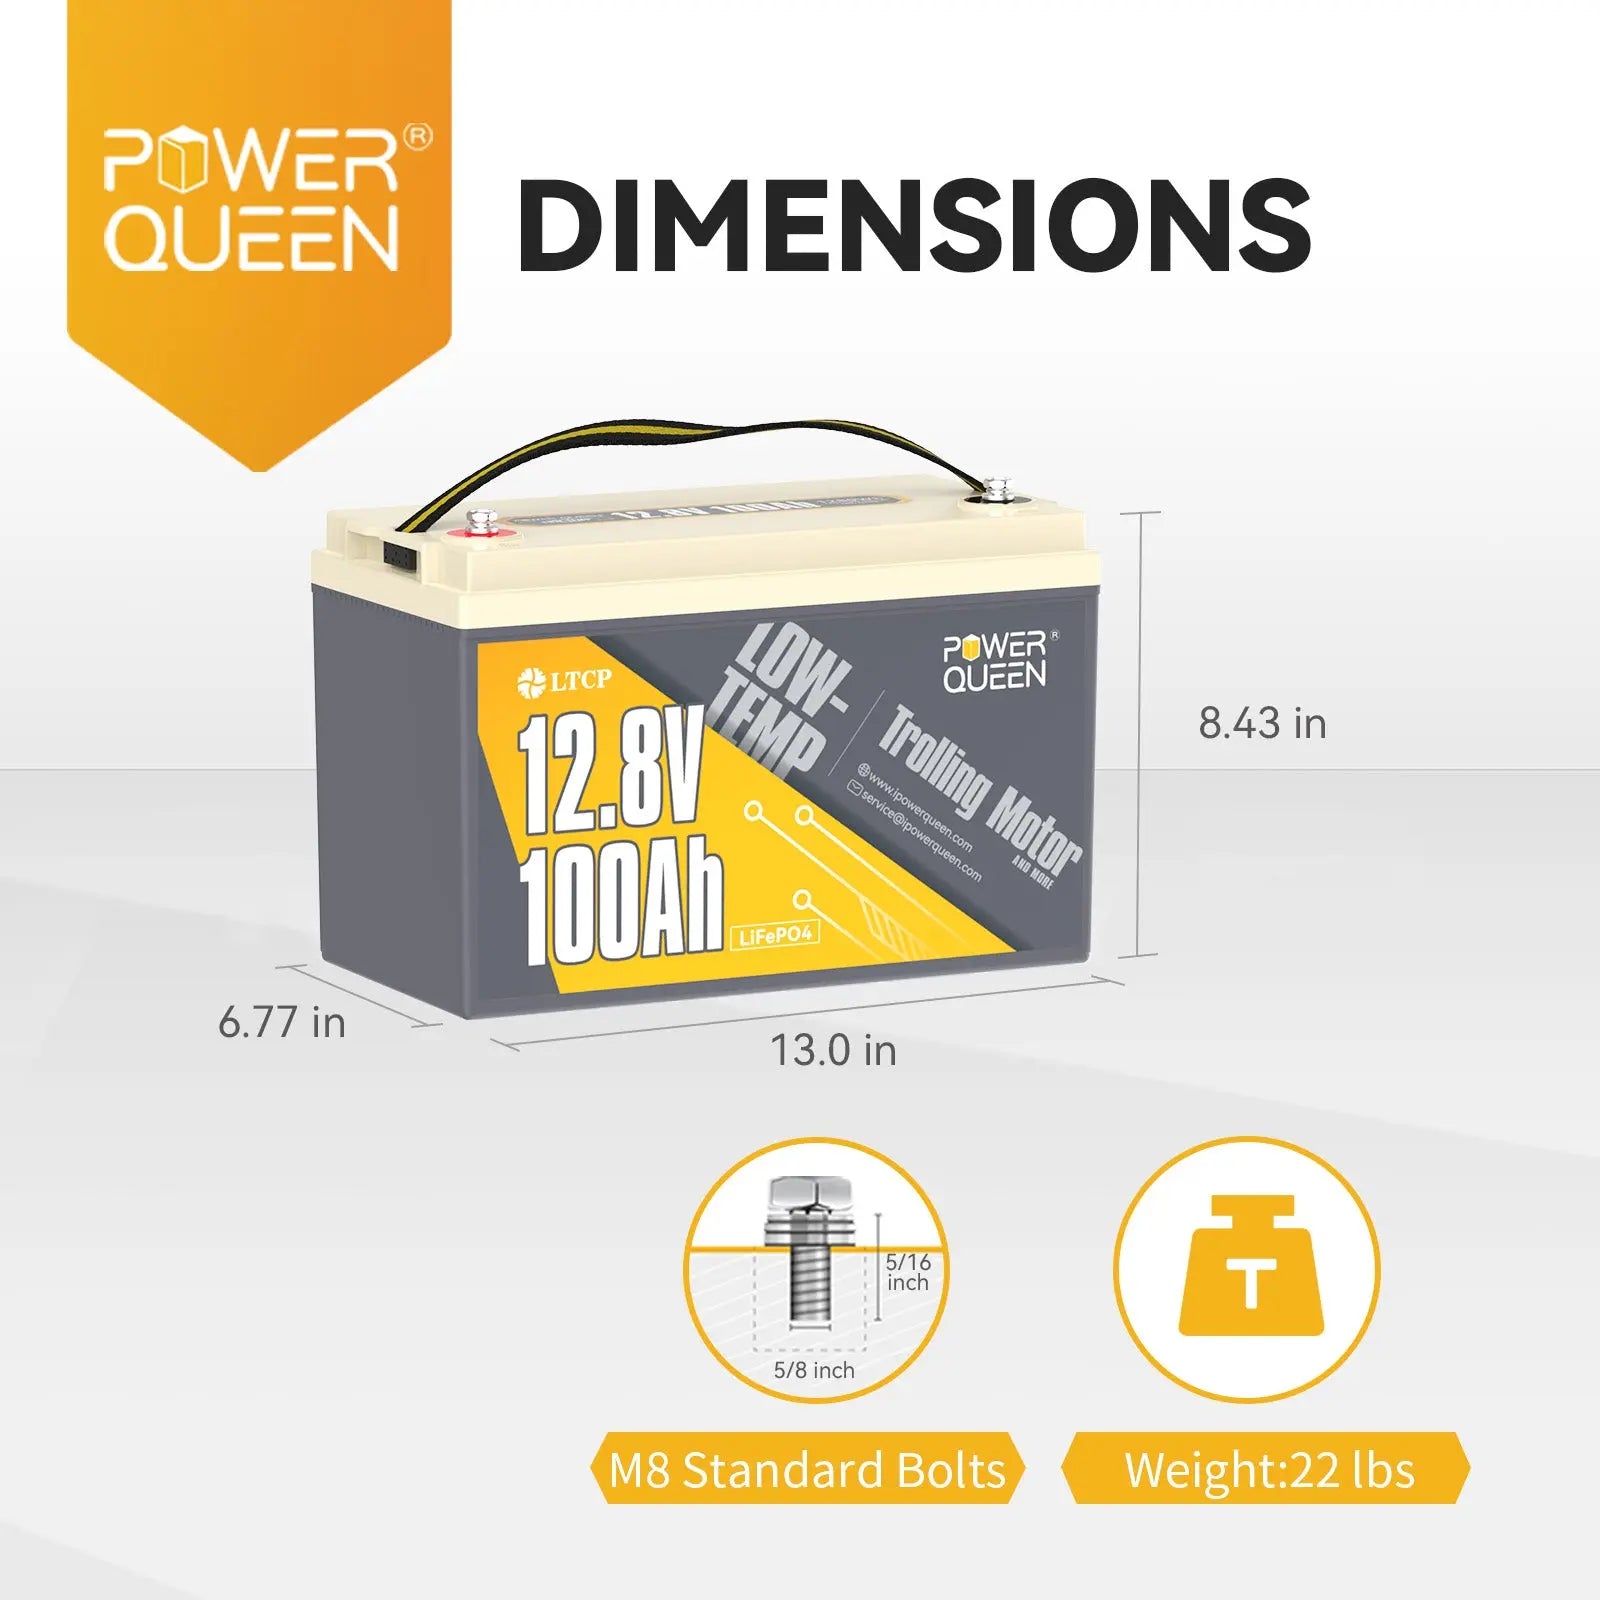 [Only $299.99] Power Queen 12.8V 100Ah Low-Temp LiFePO4 Battery Perfect for Trolling Motor, Built-in 100A BMS Power Queen